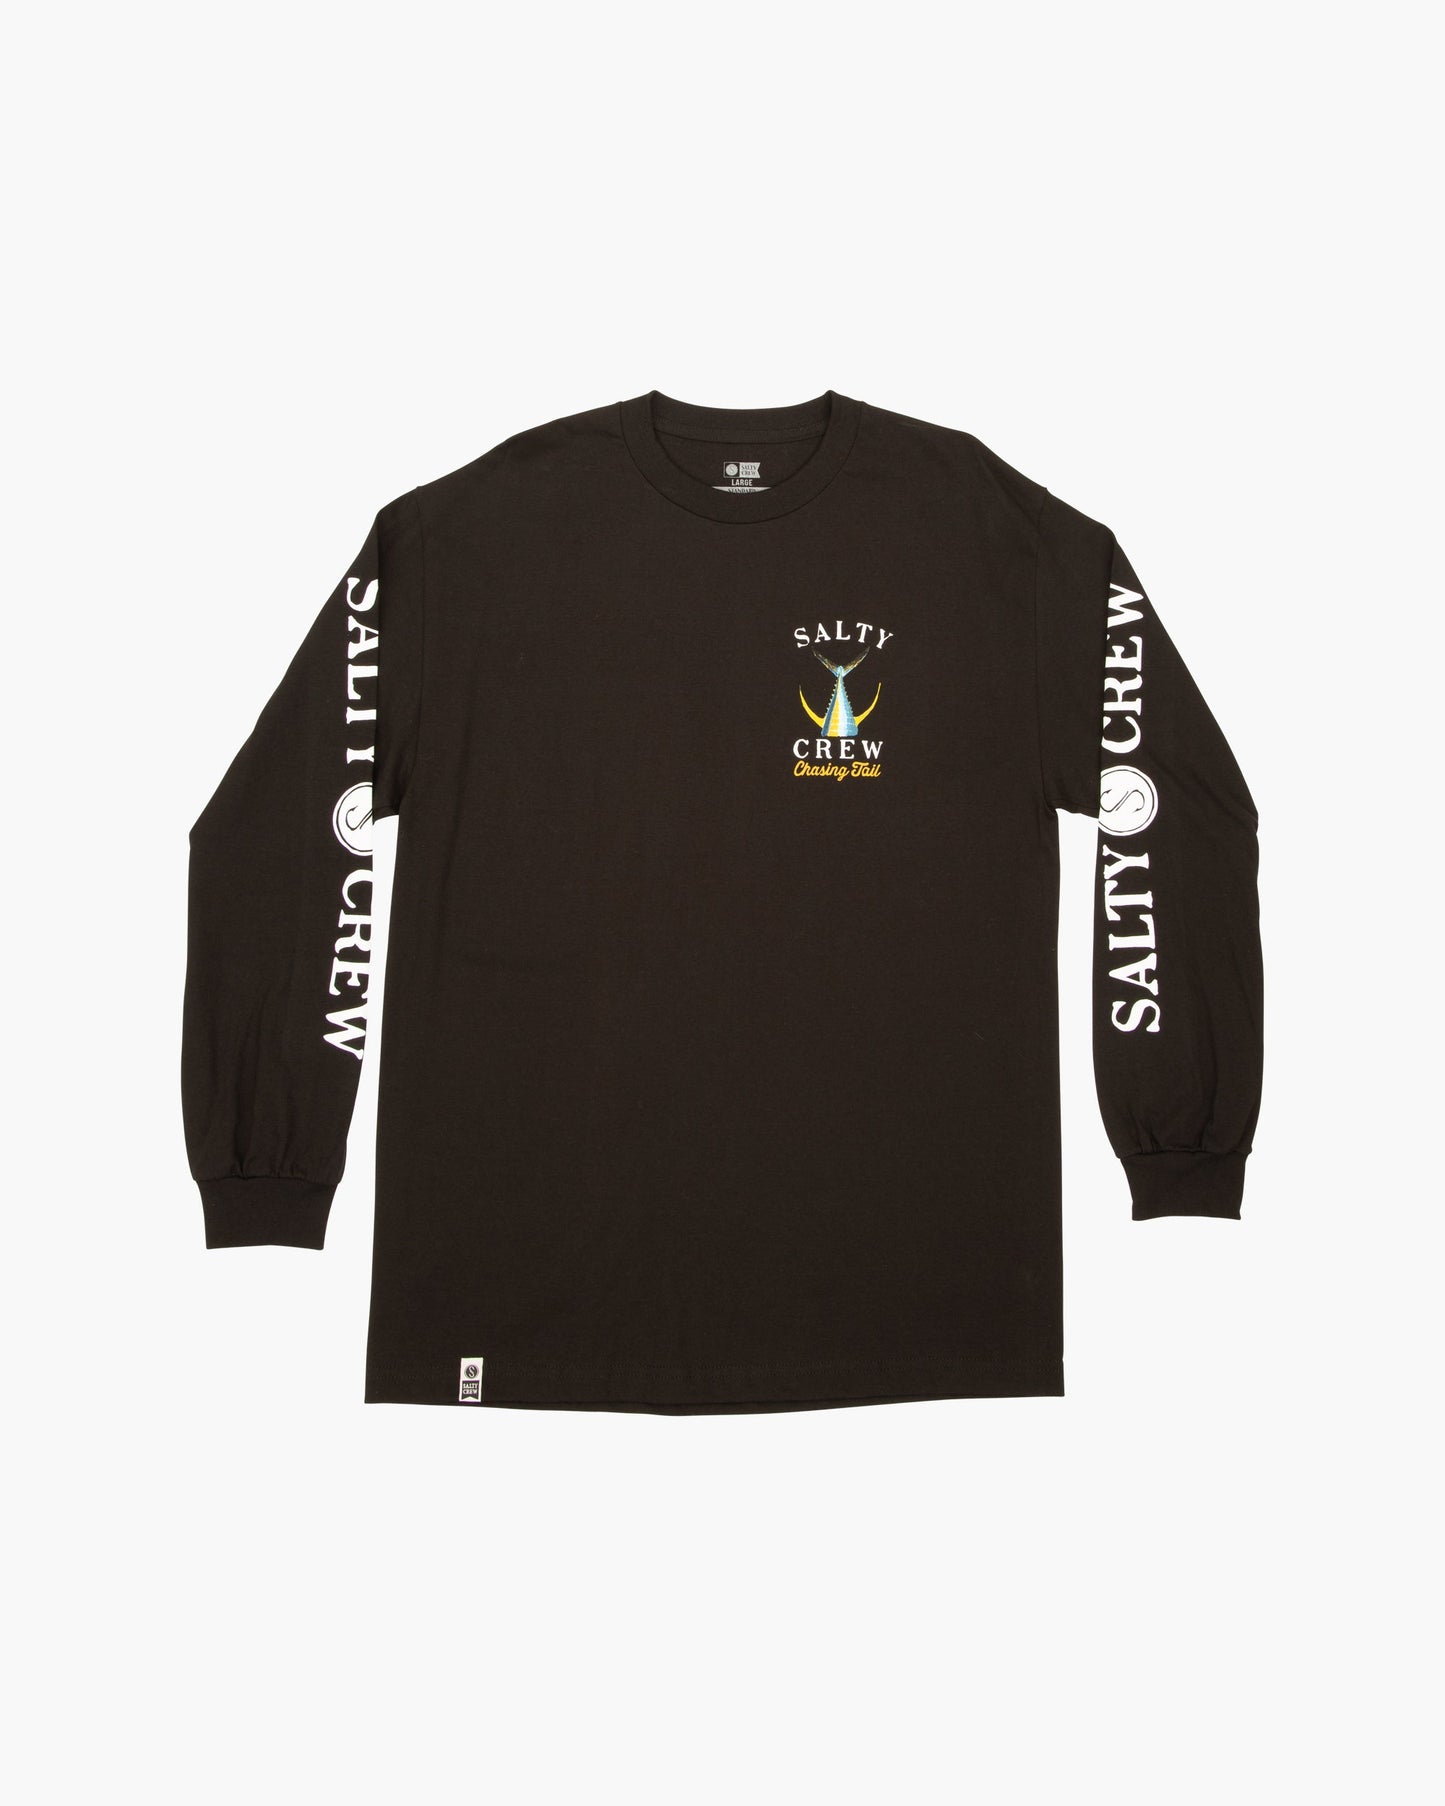 Tailed L/S Tee - Black